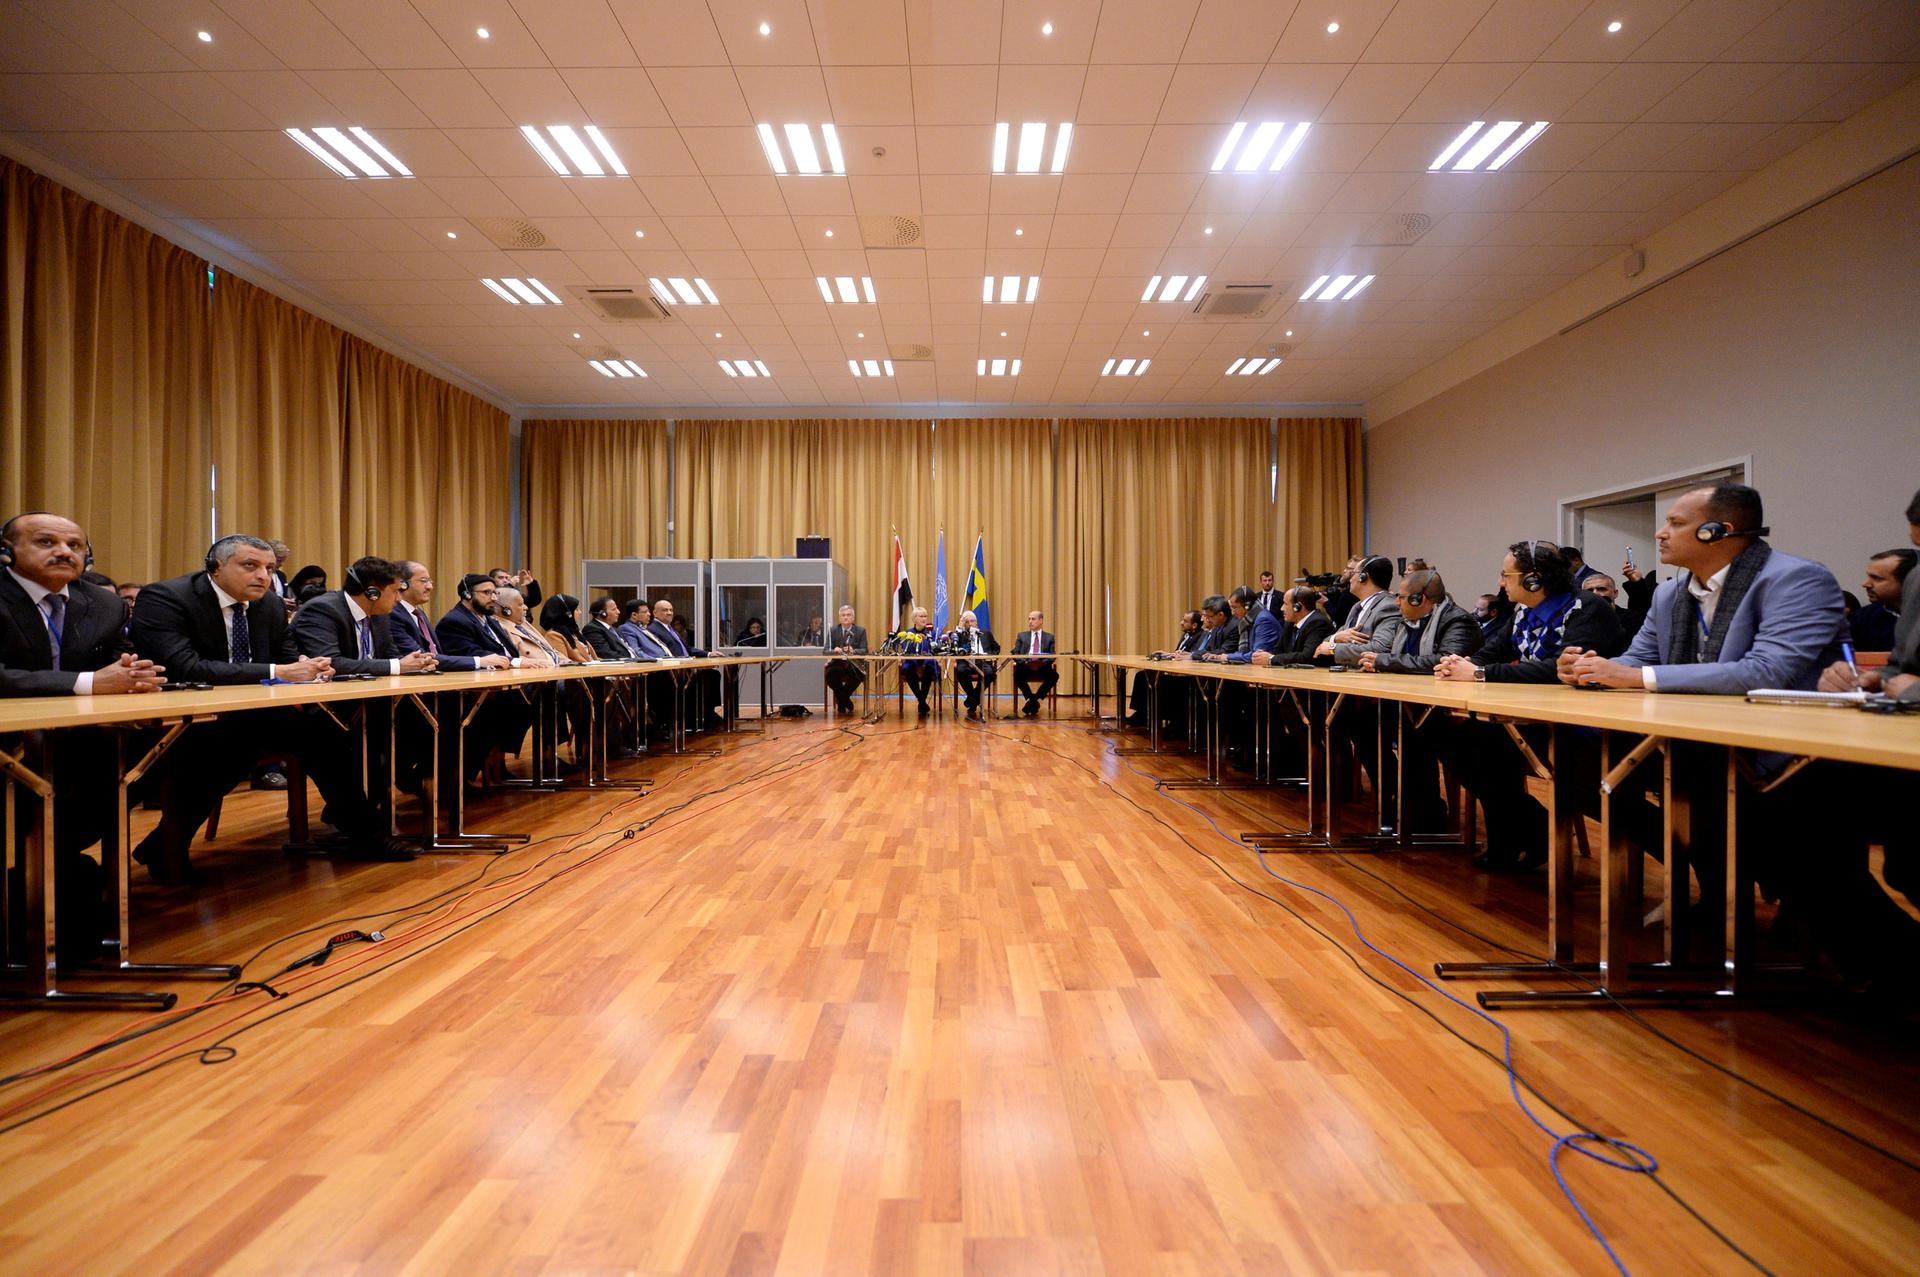 delegates sit across each other in a large room with a wood floor 